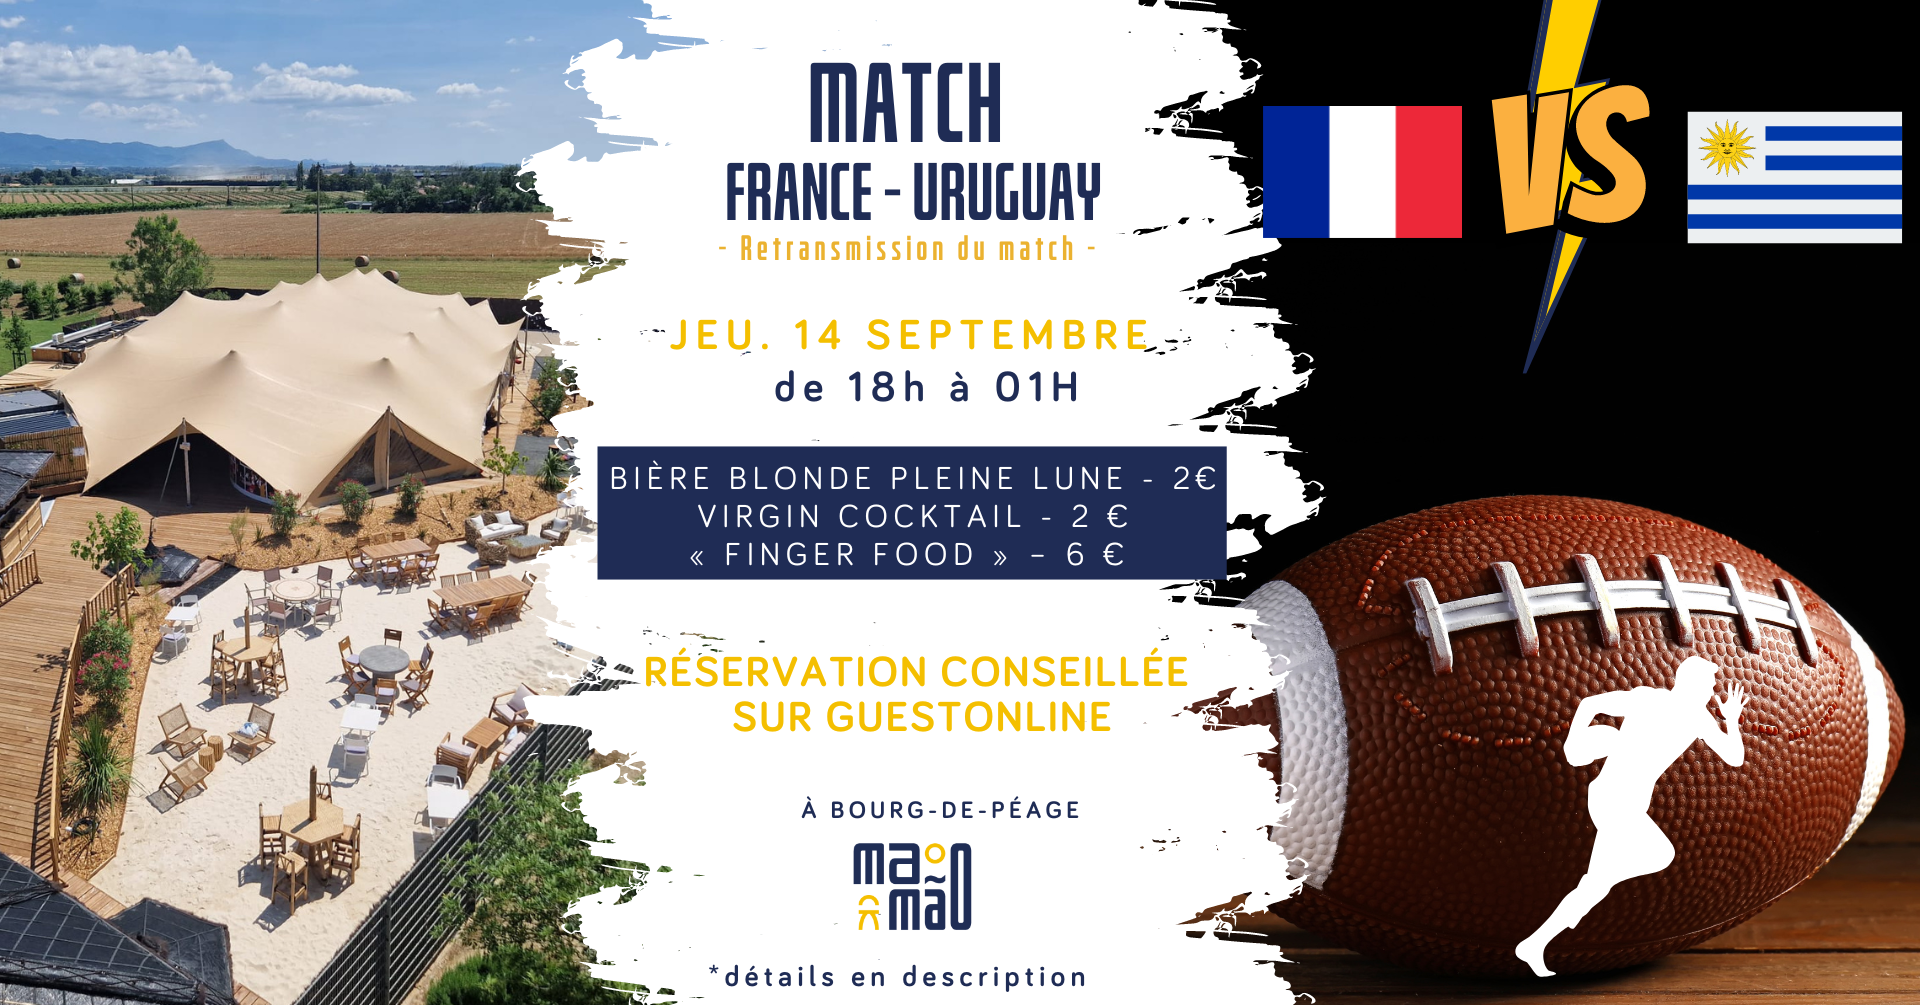 14 Septembre - Diffusion Match Rugby France - Uruguay + DJ BUFF